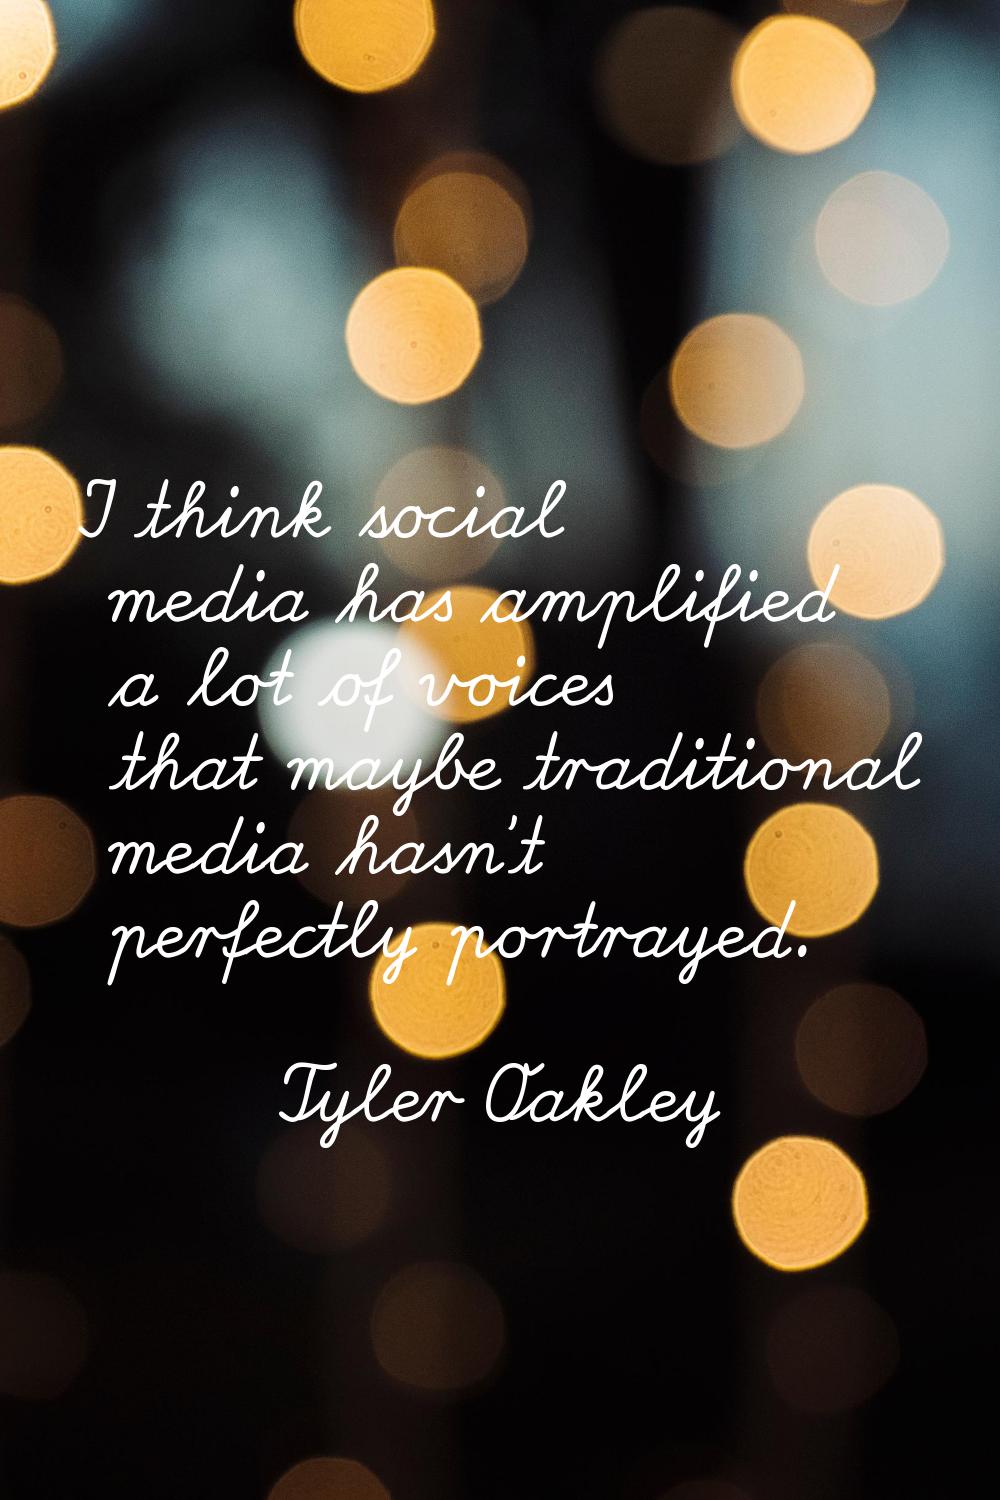 I think social media has amplified a lot of voices that maybe traditional media hasn't perfectly po